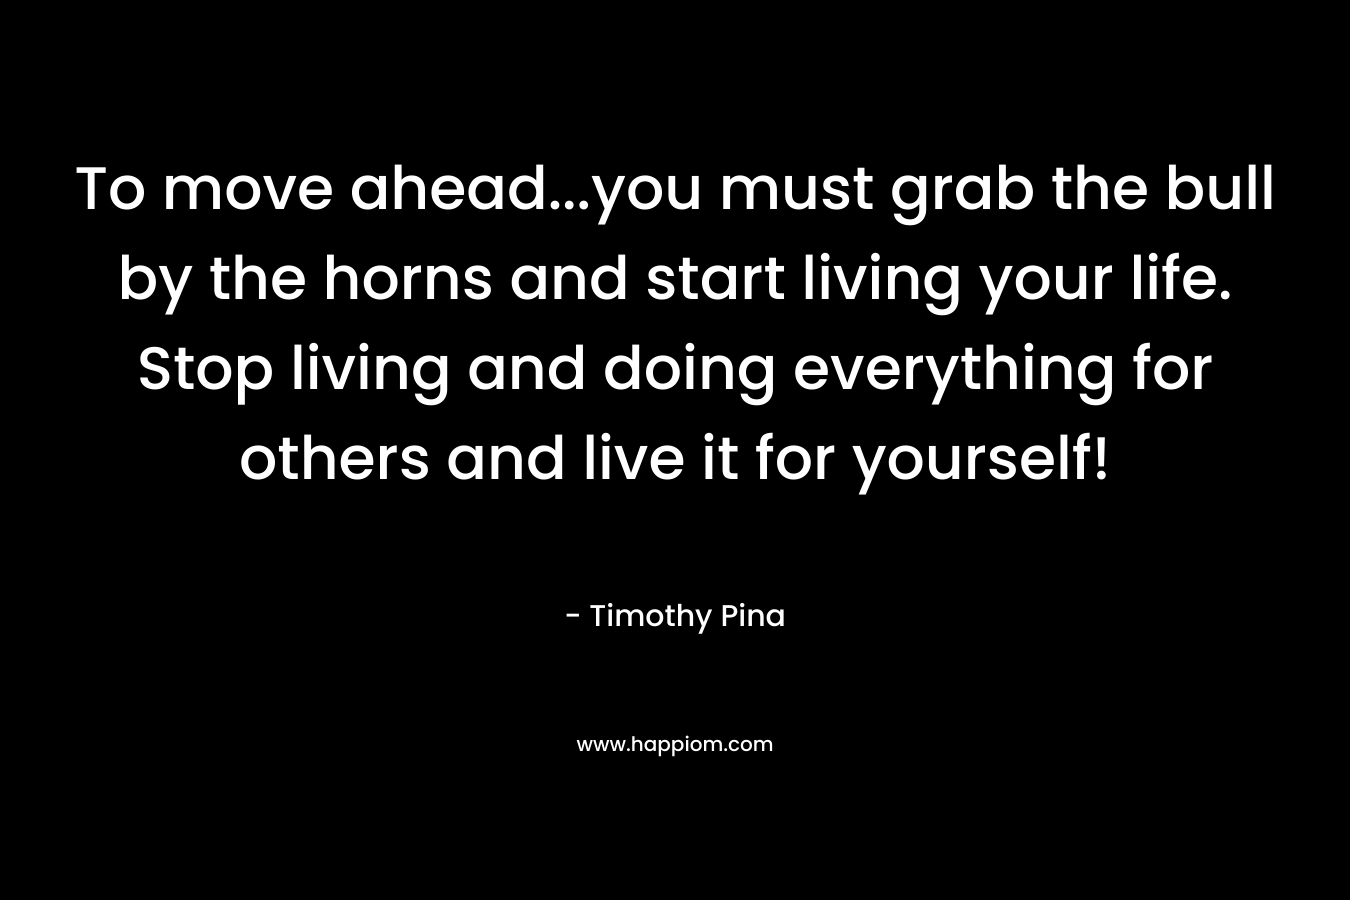 To move ahead...you must grab the bull by the horns and start living your life. Stop living and doing everything for others and live it for yourself!